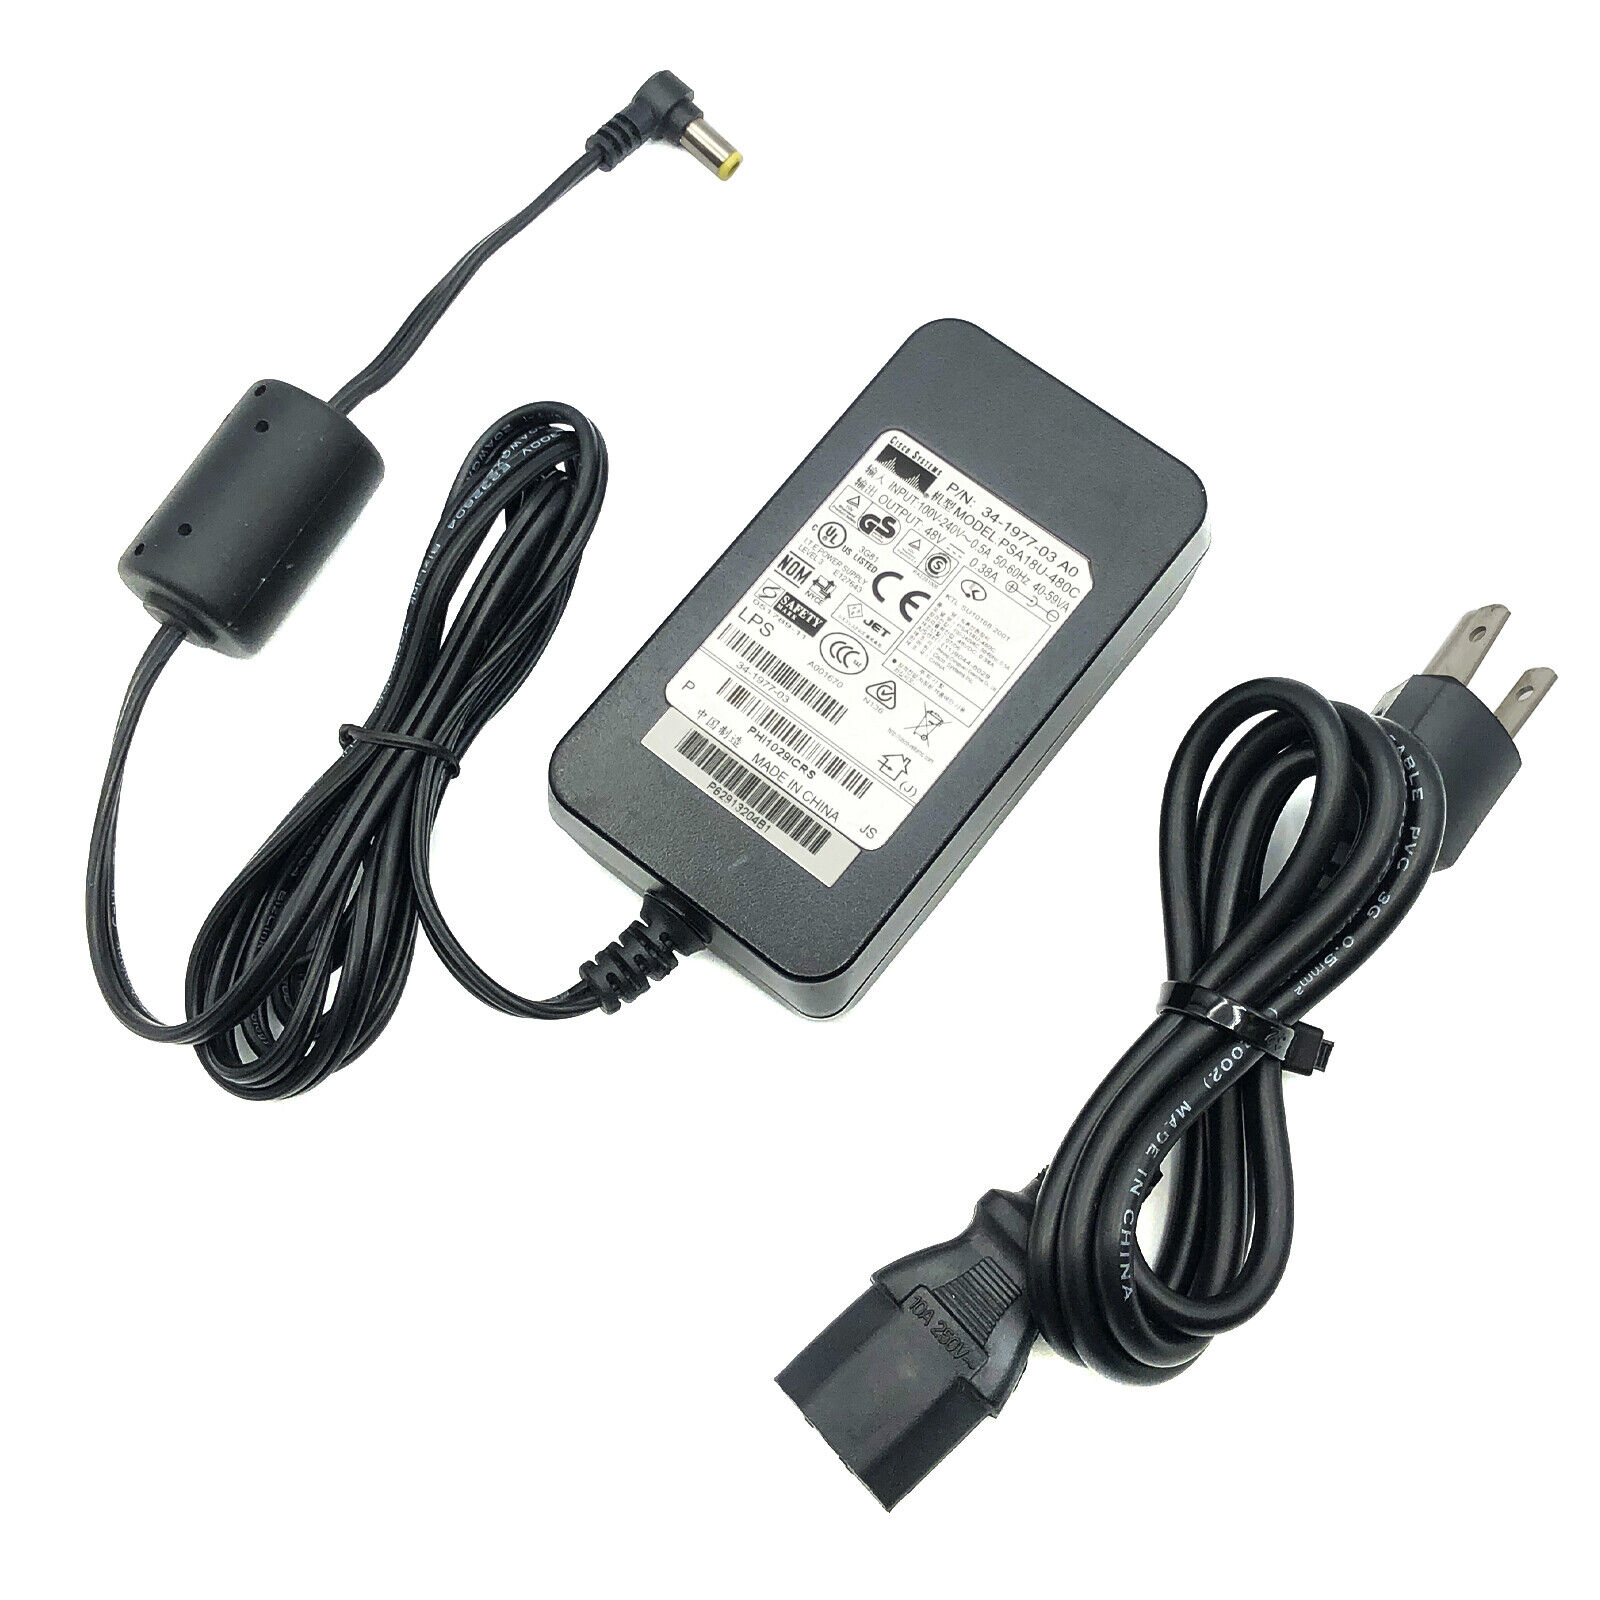 Original Cisco AC Adapter For Aironet 3500 3600 3700 Wireless Charger 48W w/PC